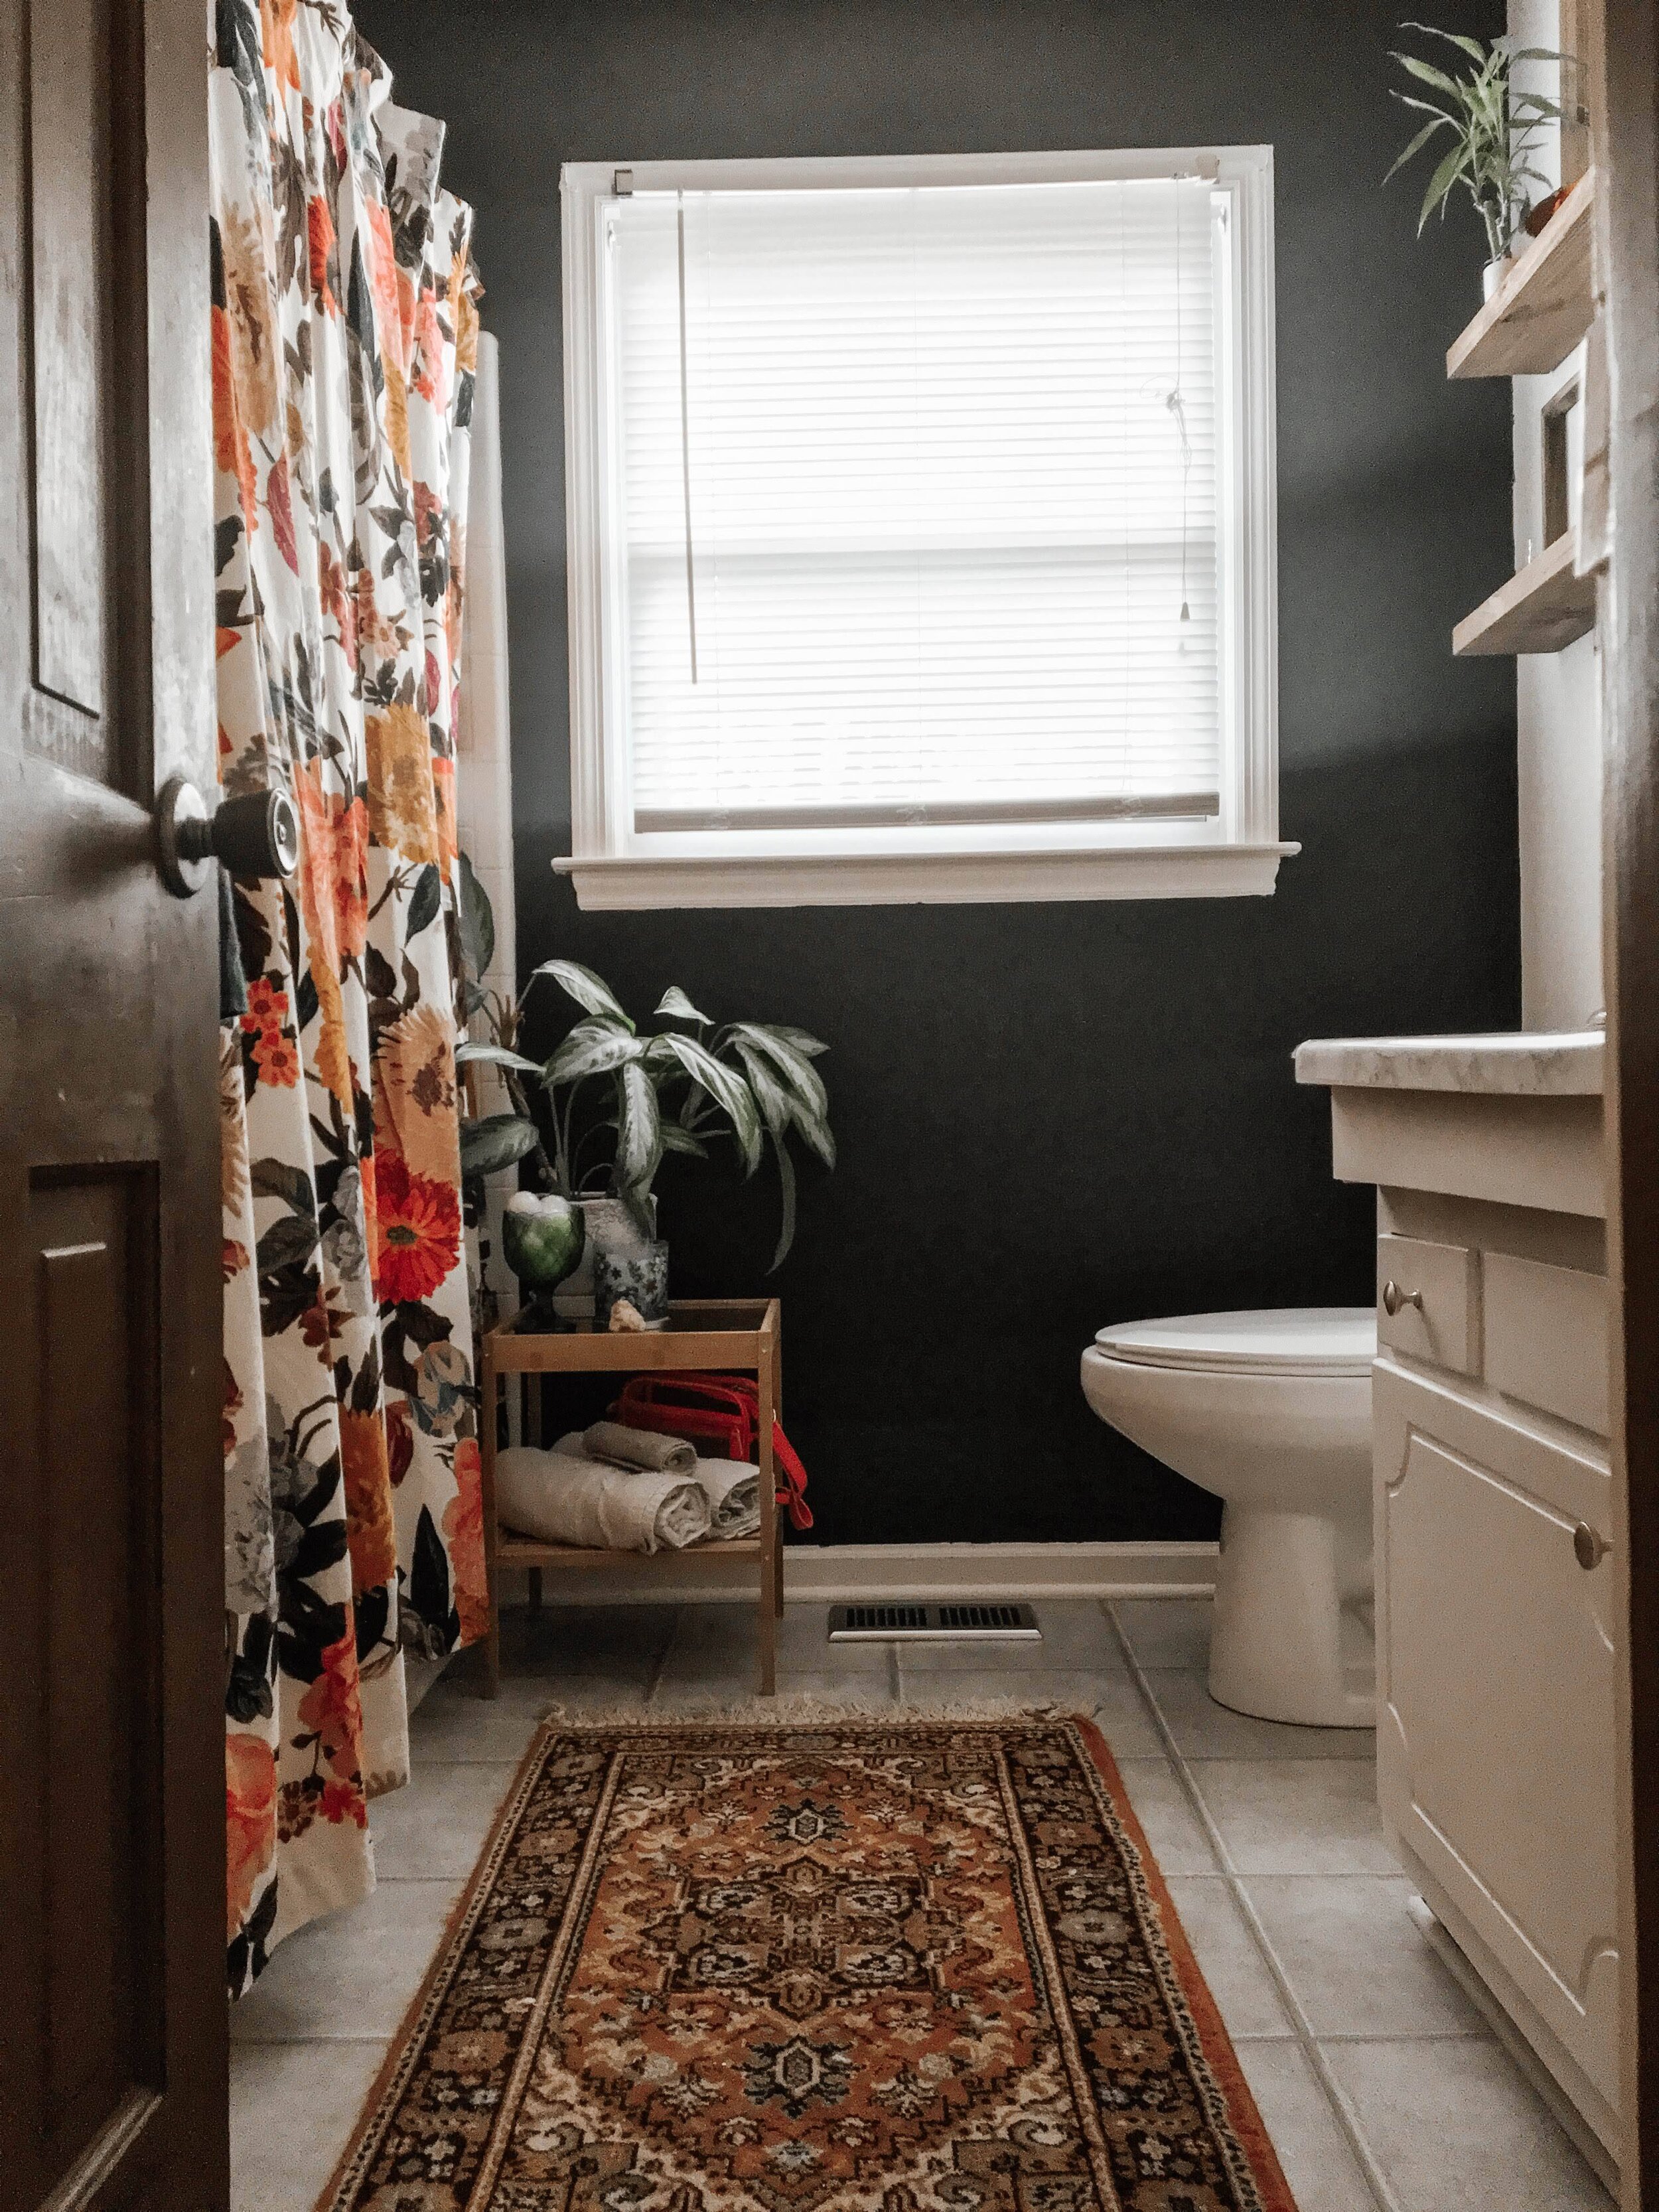 If you just want to hide an old tub area, go bold with big flowers on a new shower curtain